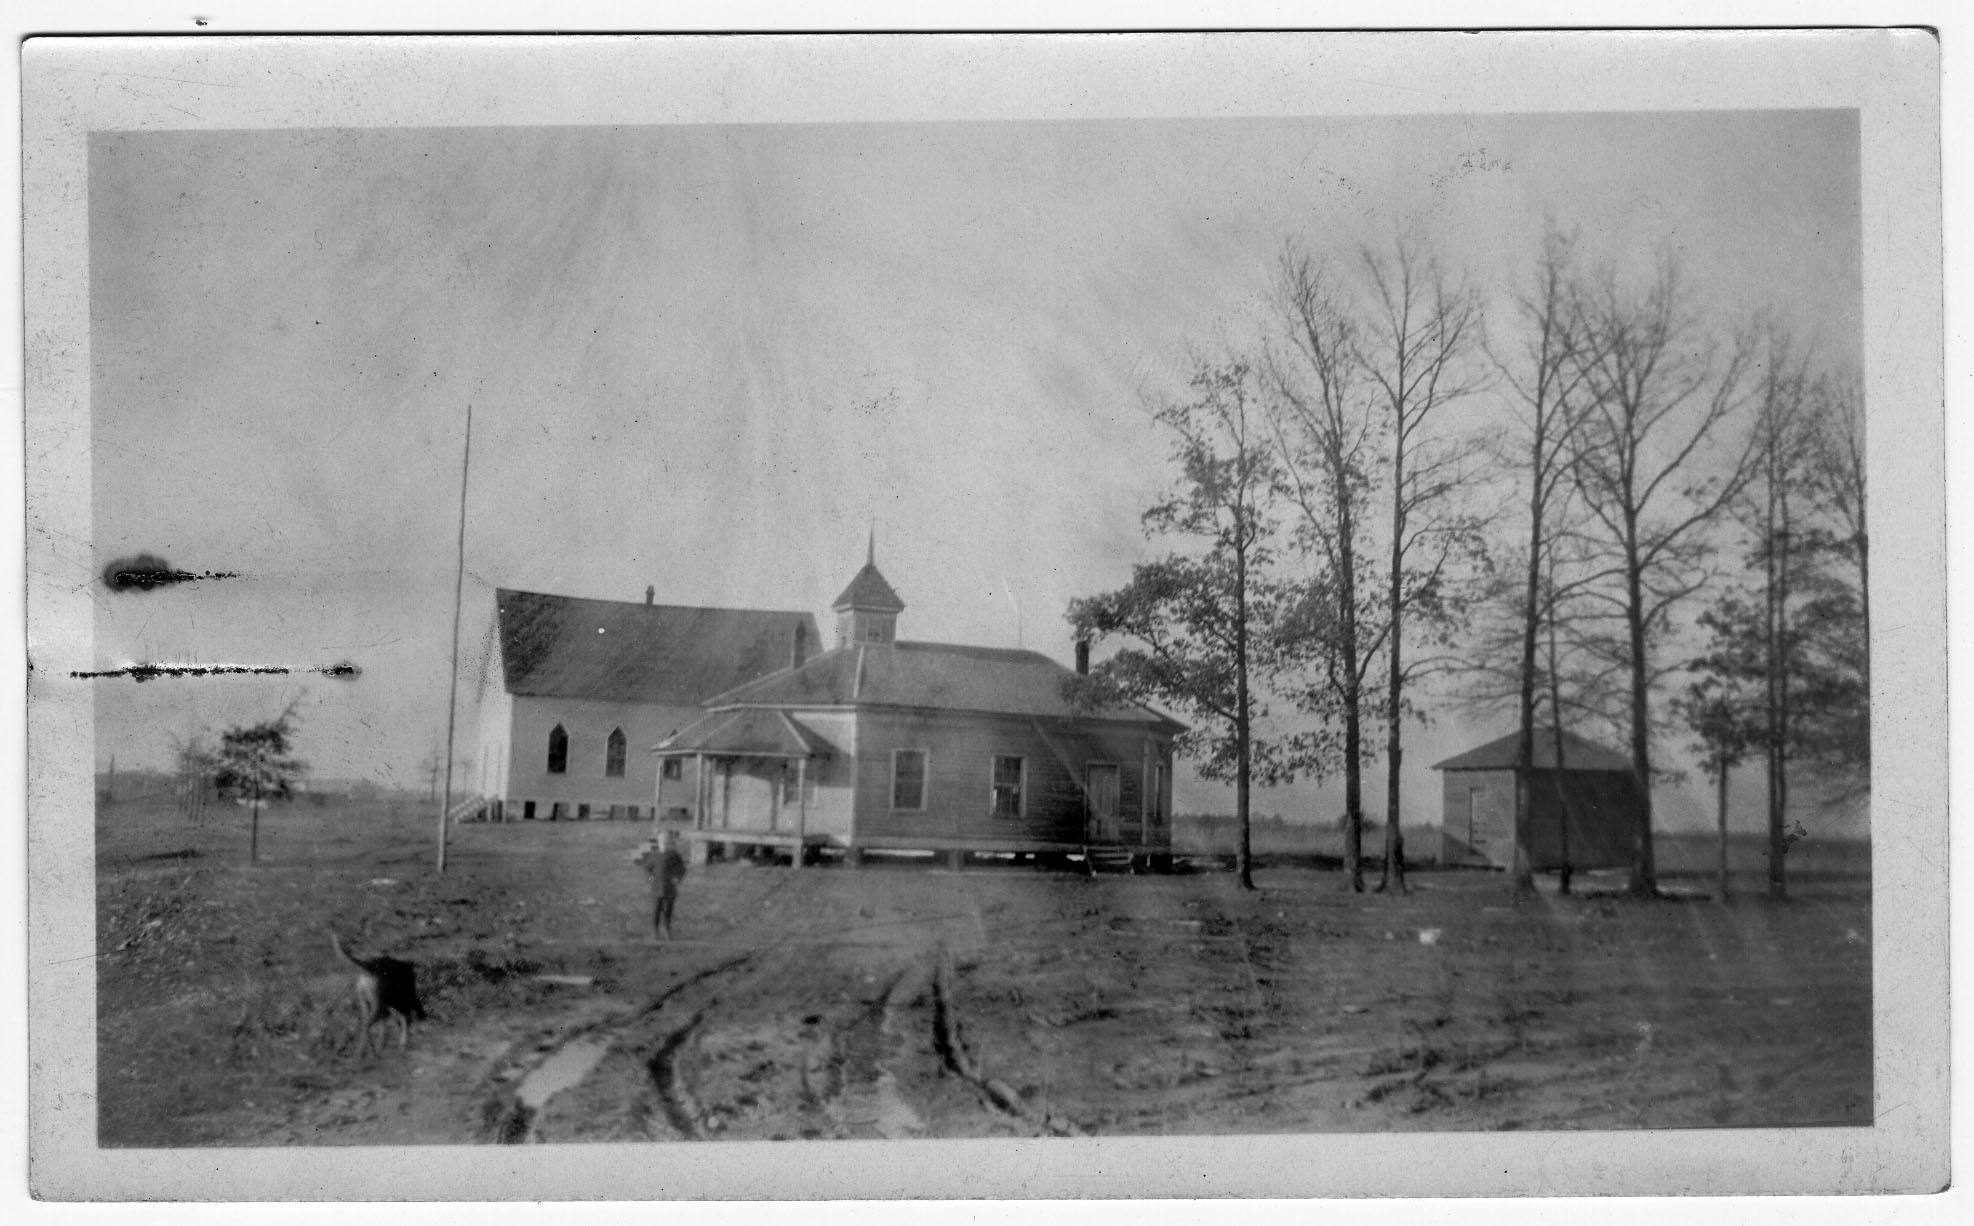 The old Johnstone School - Courtesy of the Fitzgerald Collection, WU Pettus Archives